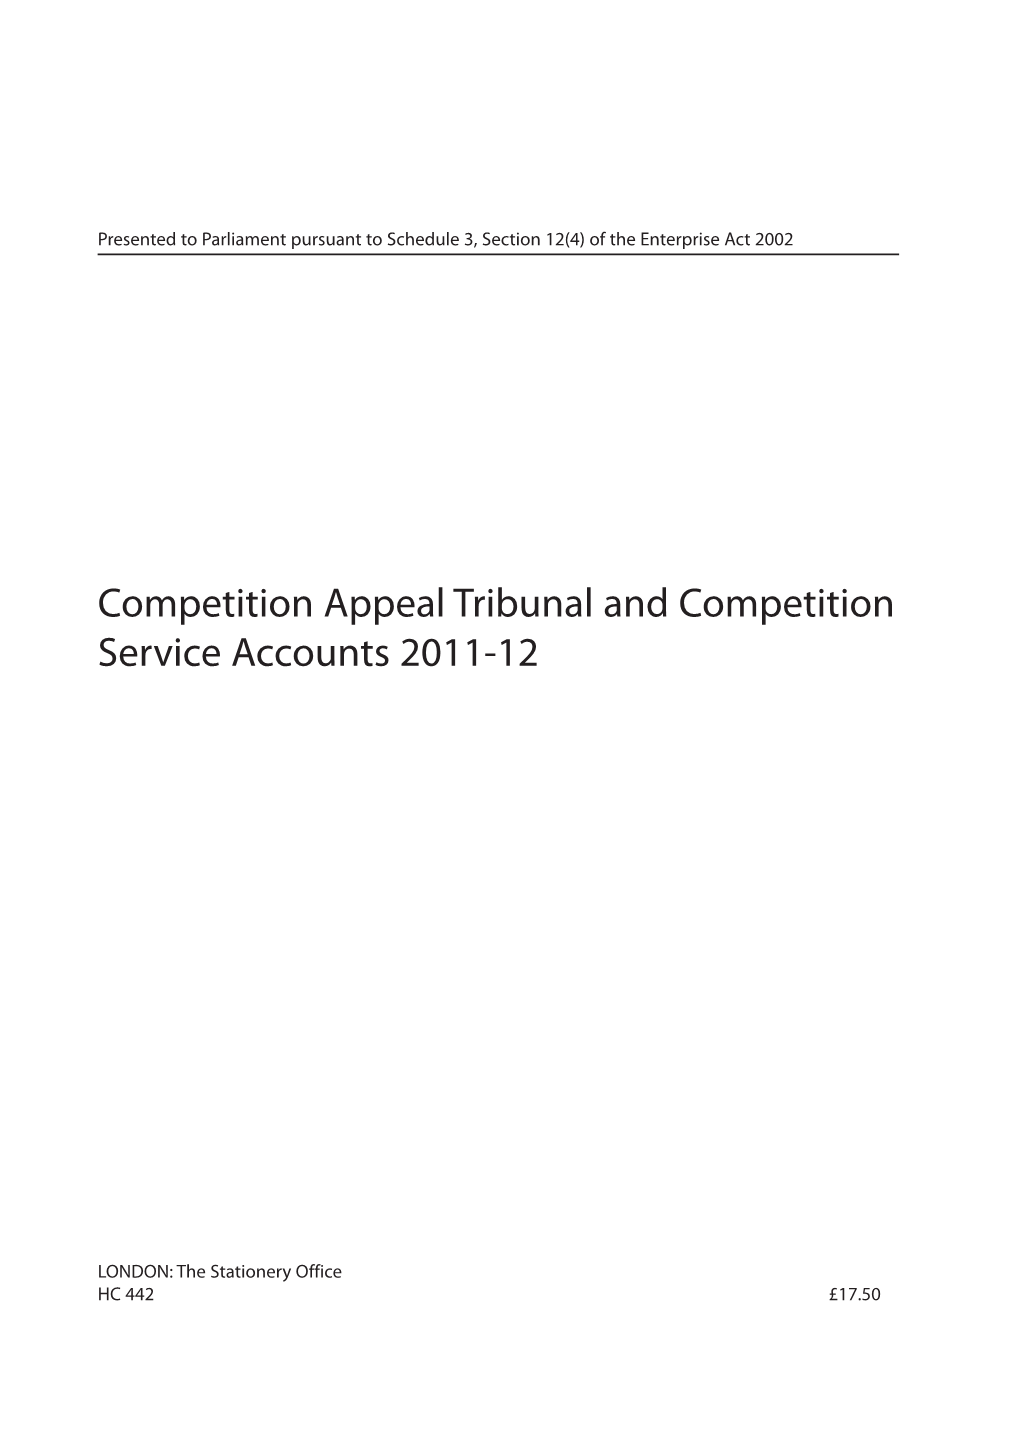 Competition Appeal Tribunal and Competition Service Accounts 2011-12 HC 442 Session 2012-2013